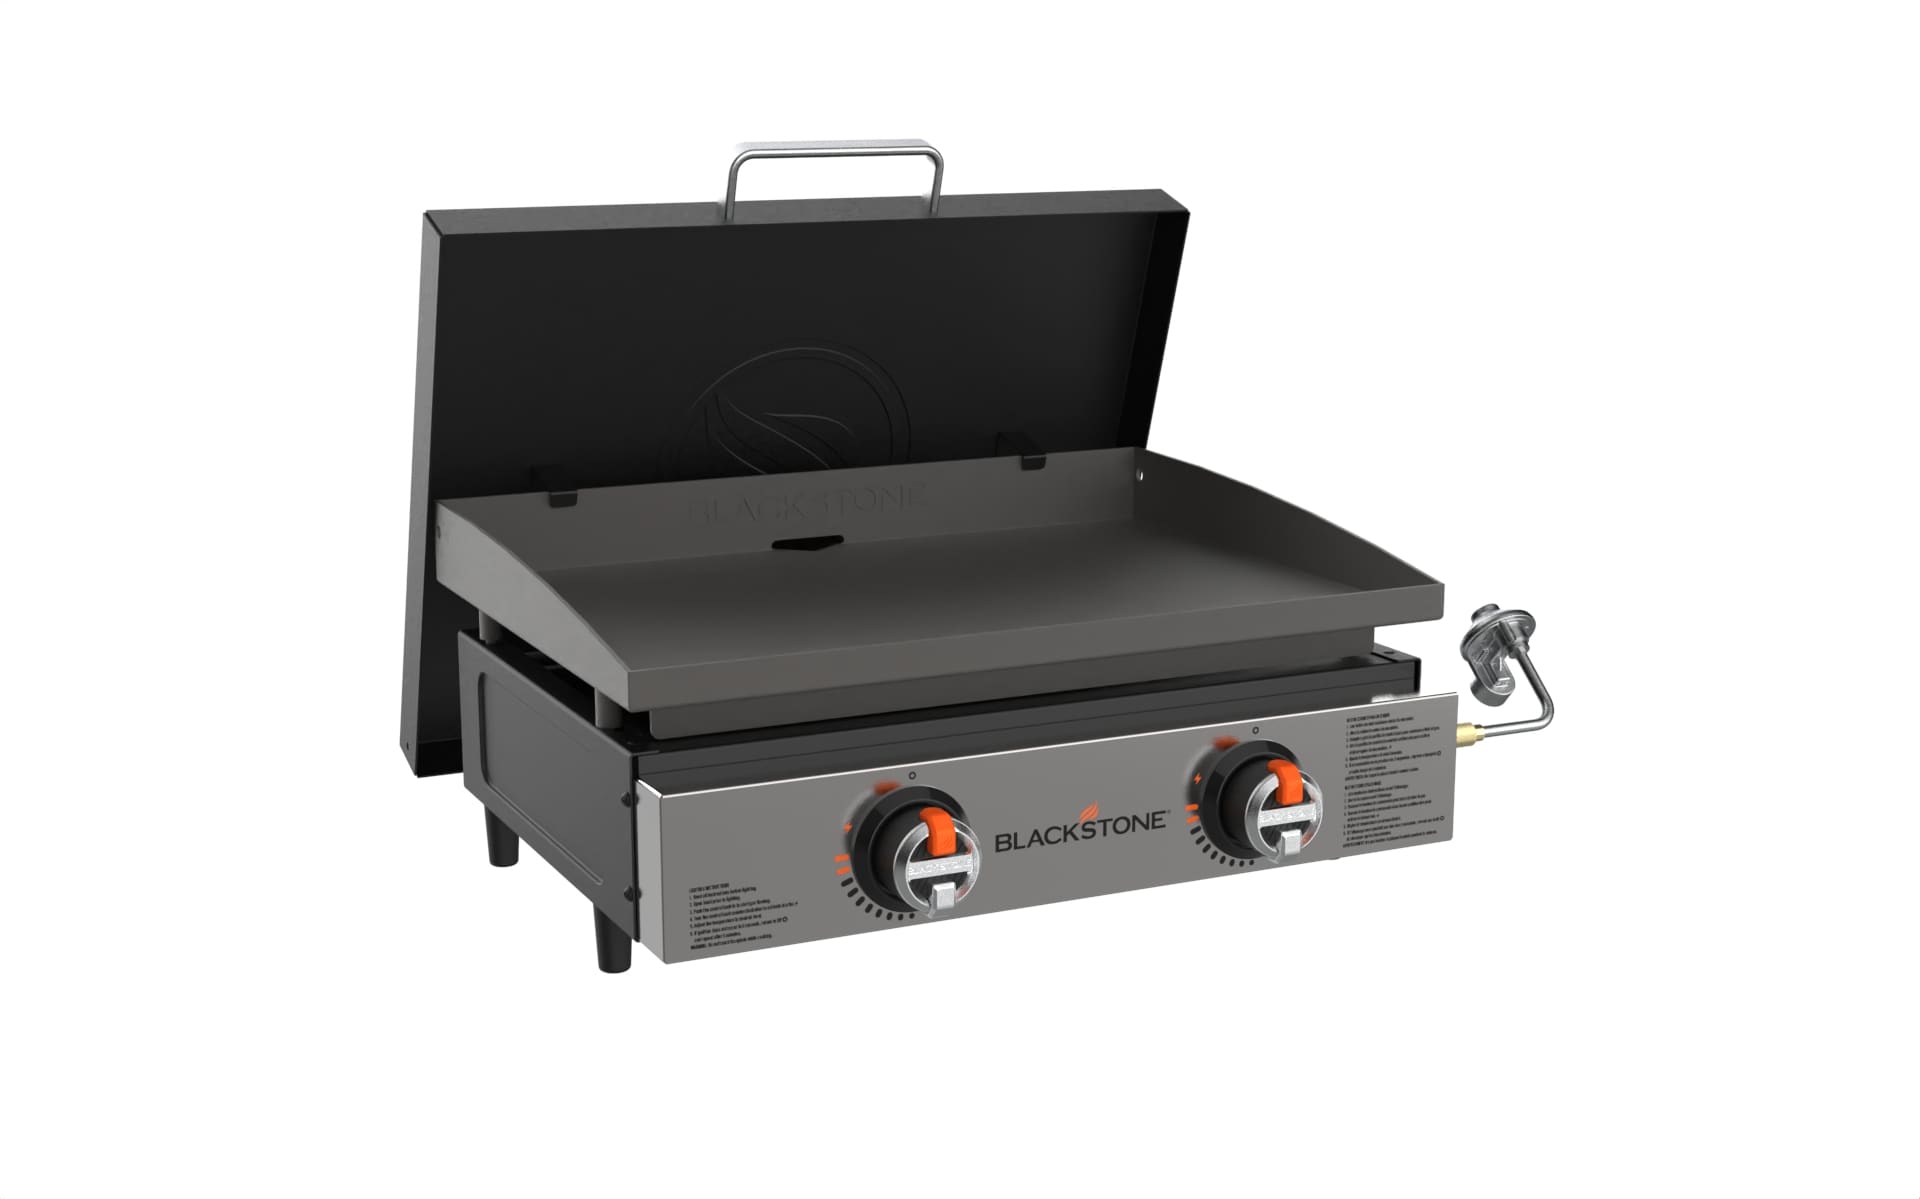 Blackstone On the Go Tailgater Griddle Combo 534-Sq in Black